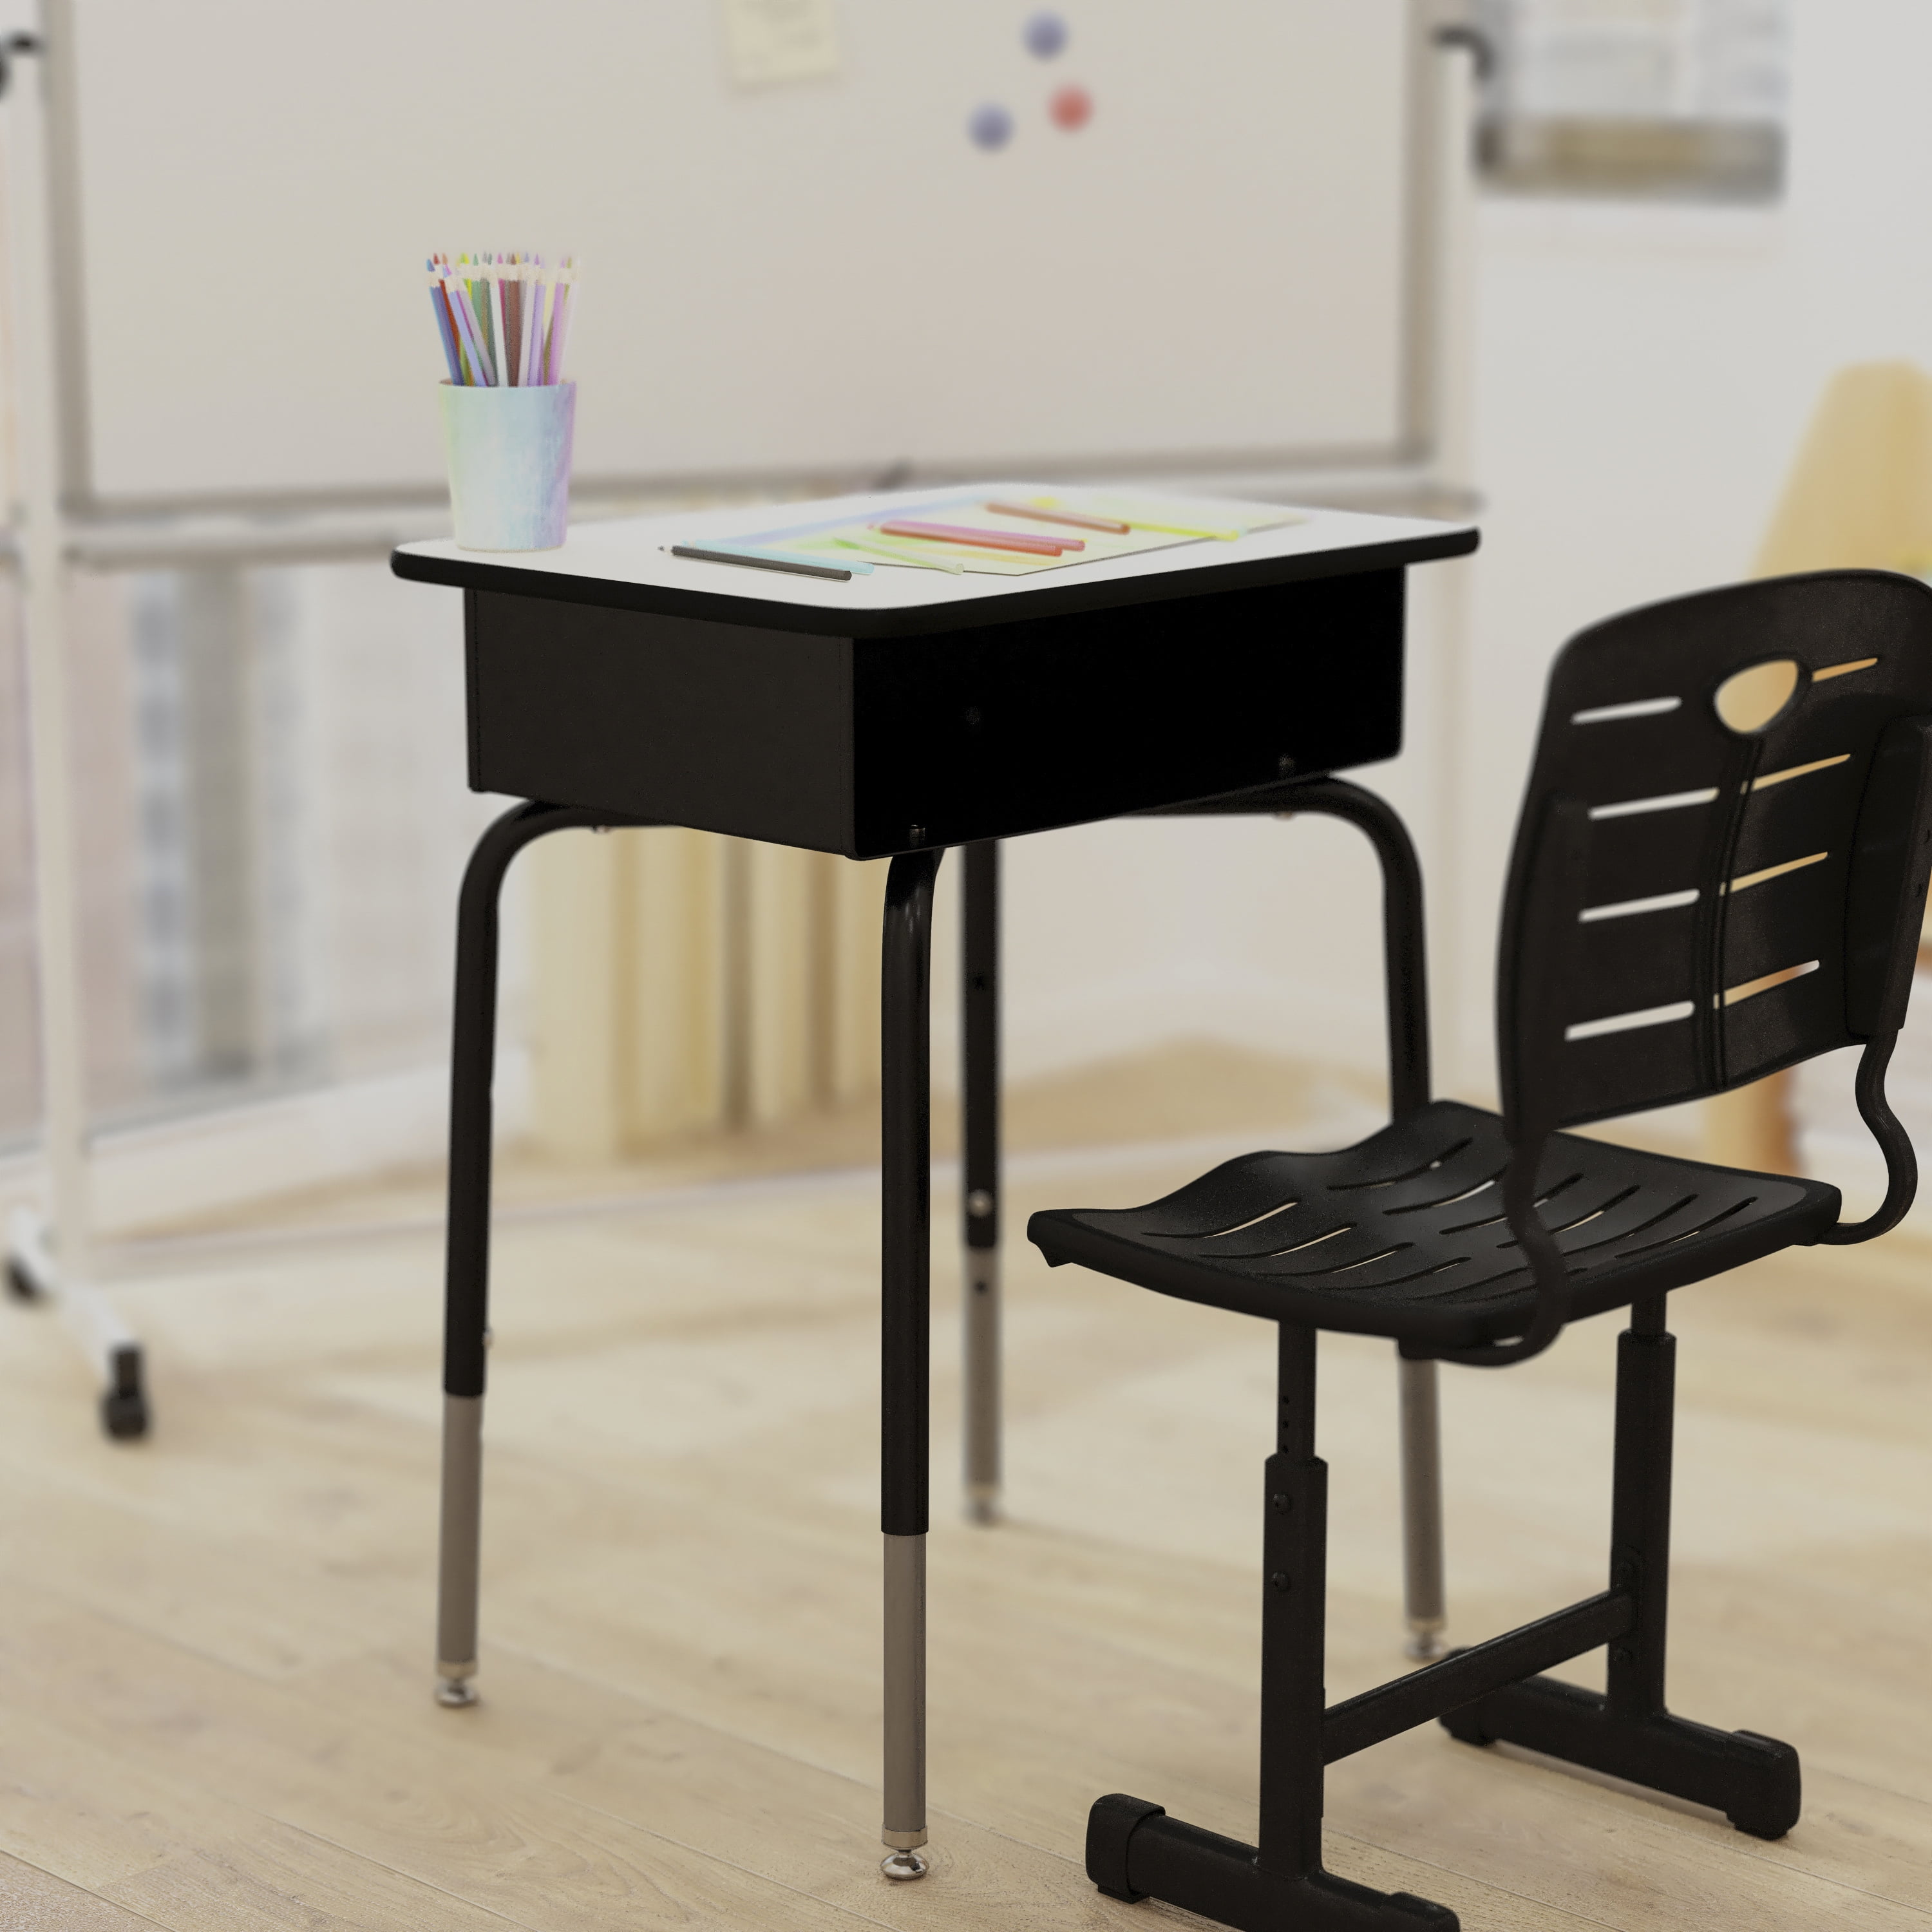 HBCY Creations Student Desk - Gray Top - Height Adjustable Legs -  Crisscross Frame for Added Stability - Open Front Book Box - Pencil Grooves